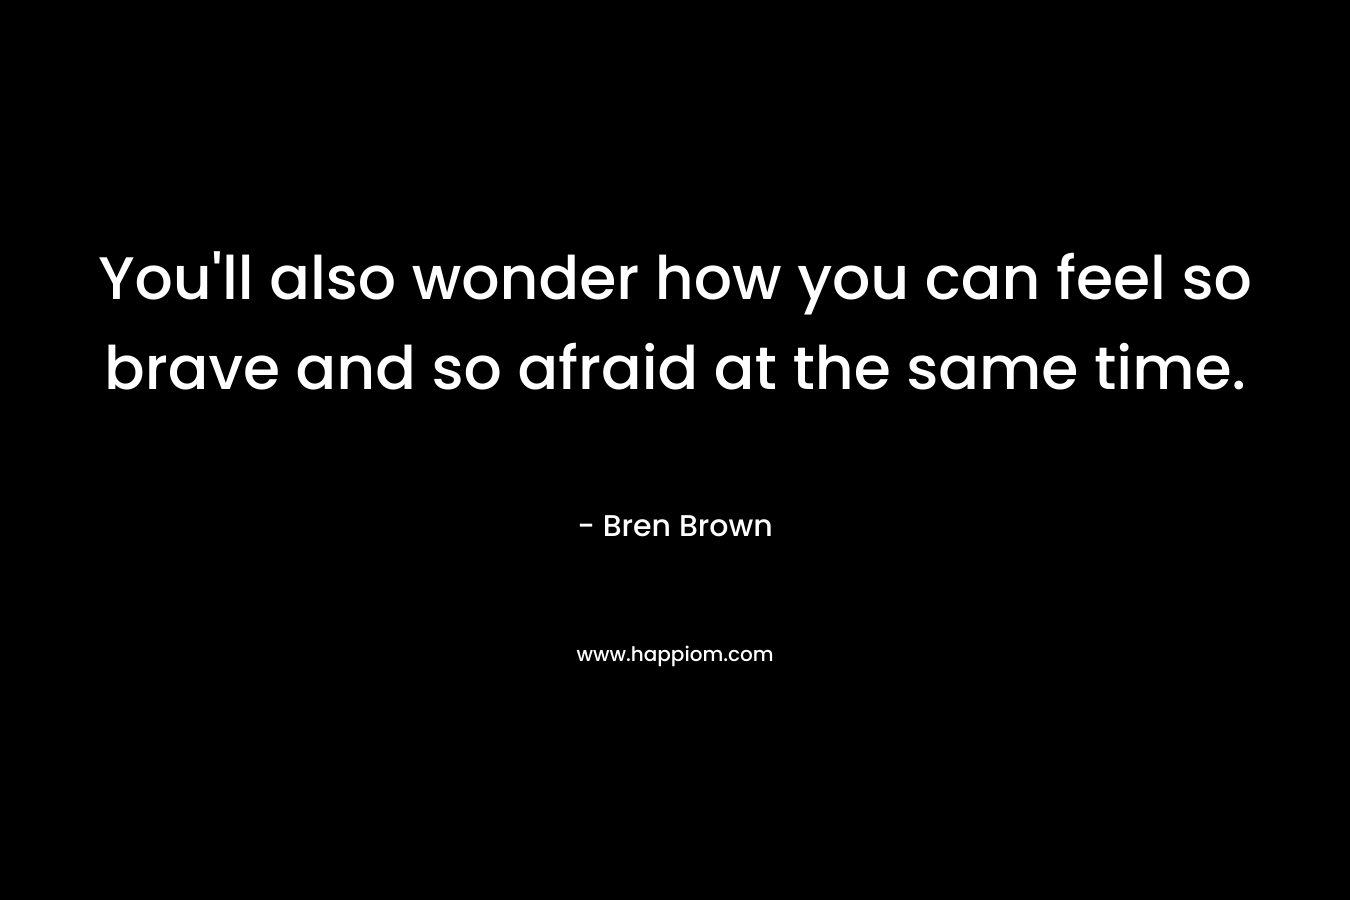 You’ll also wonder how you can feel so brave and so afraid at the same time. – Bren Brown